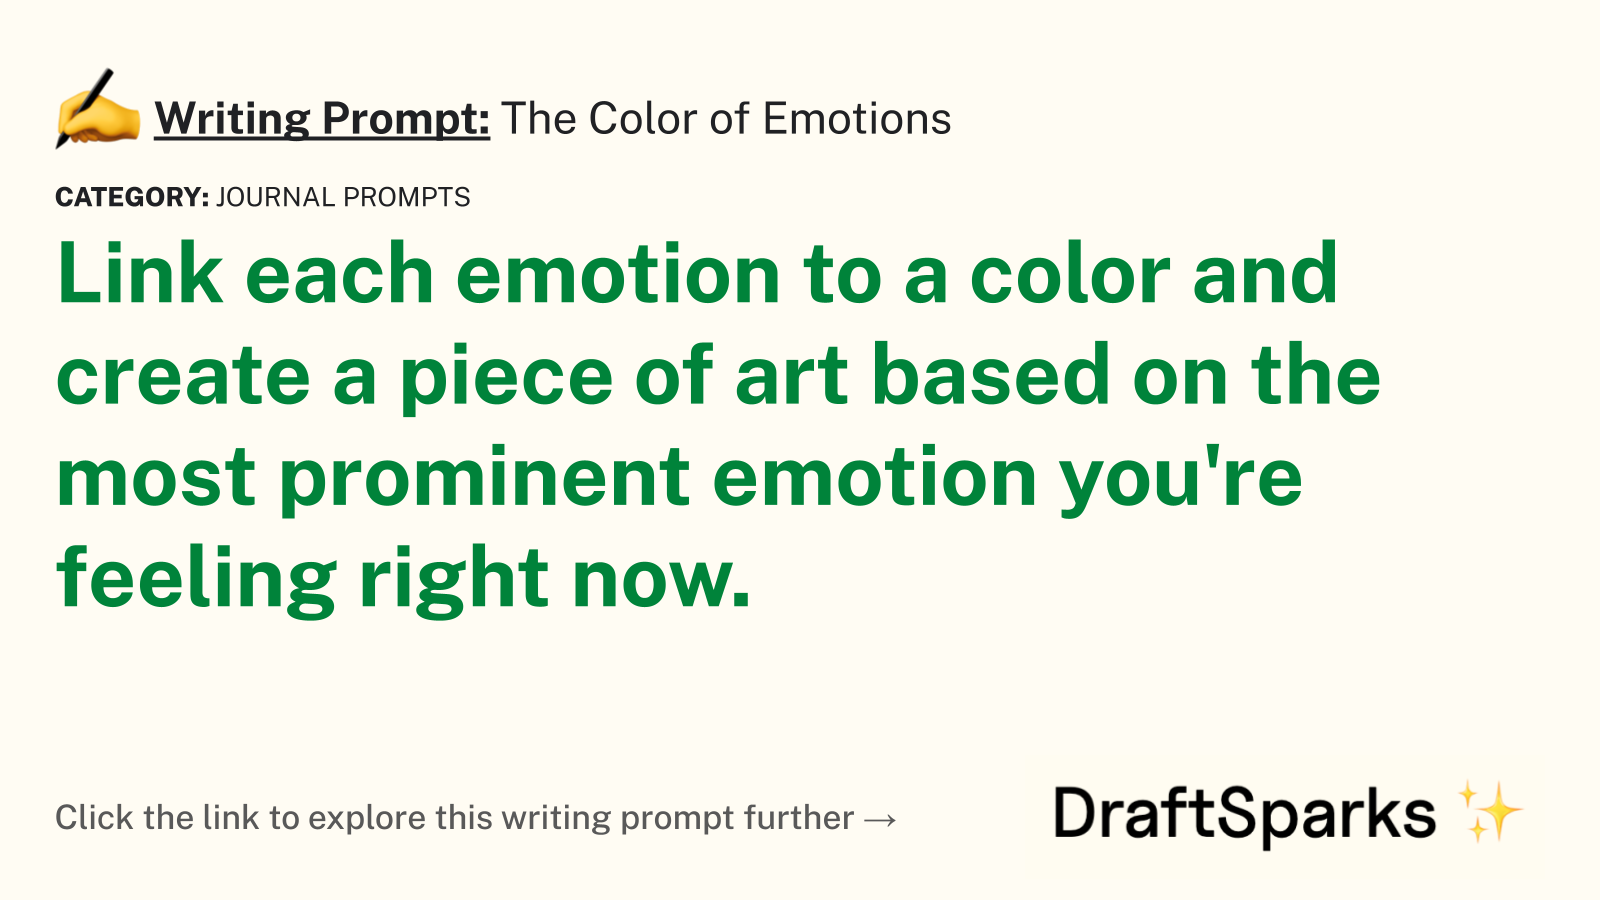 The Color of Emotions